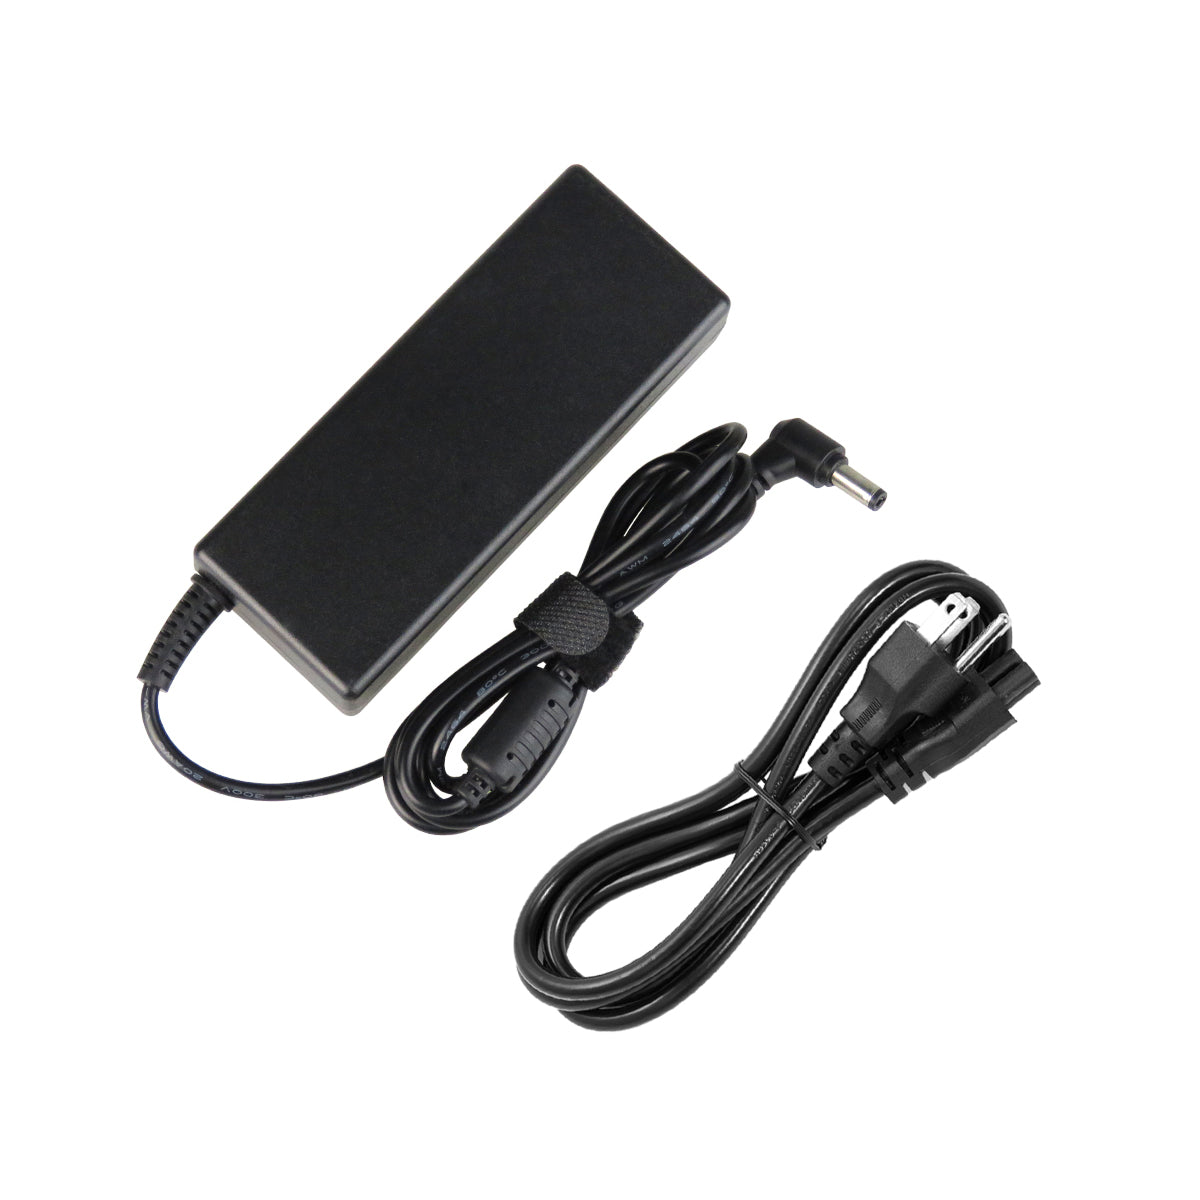 AC Adapter Charger for ASUS N82JV Notebook.